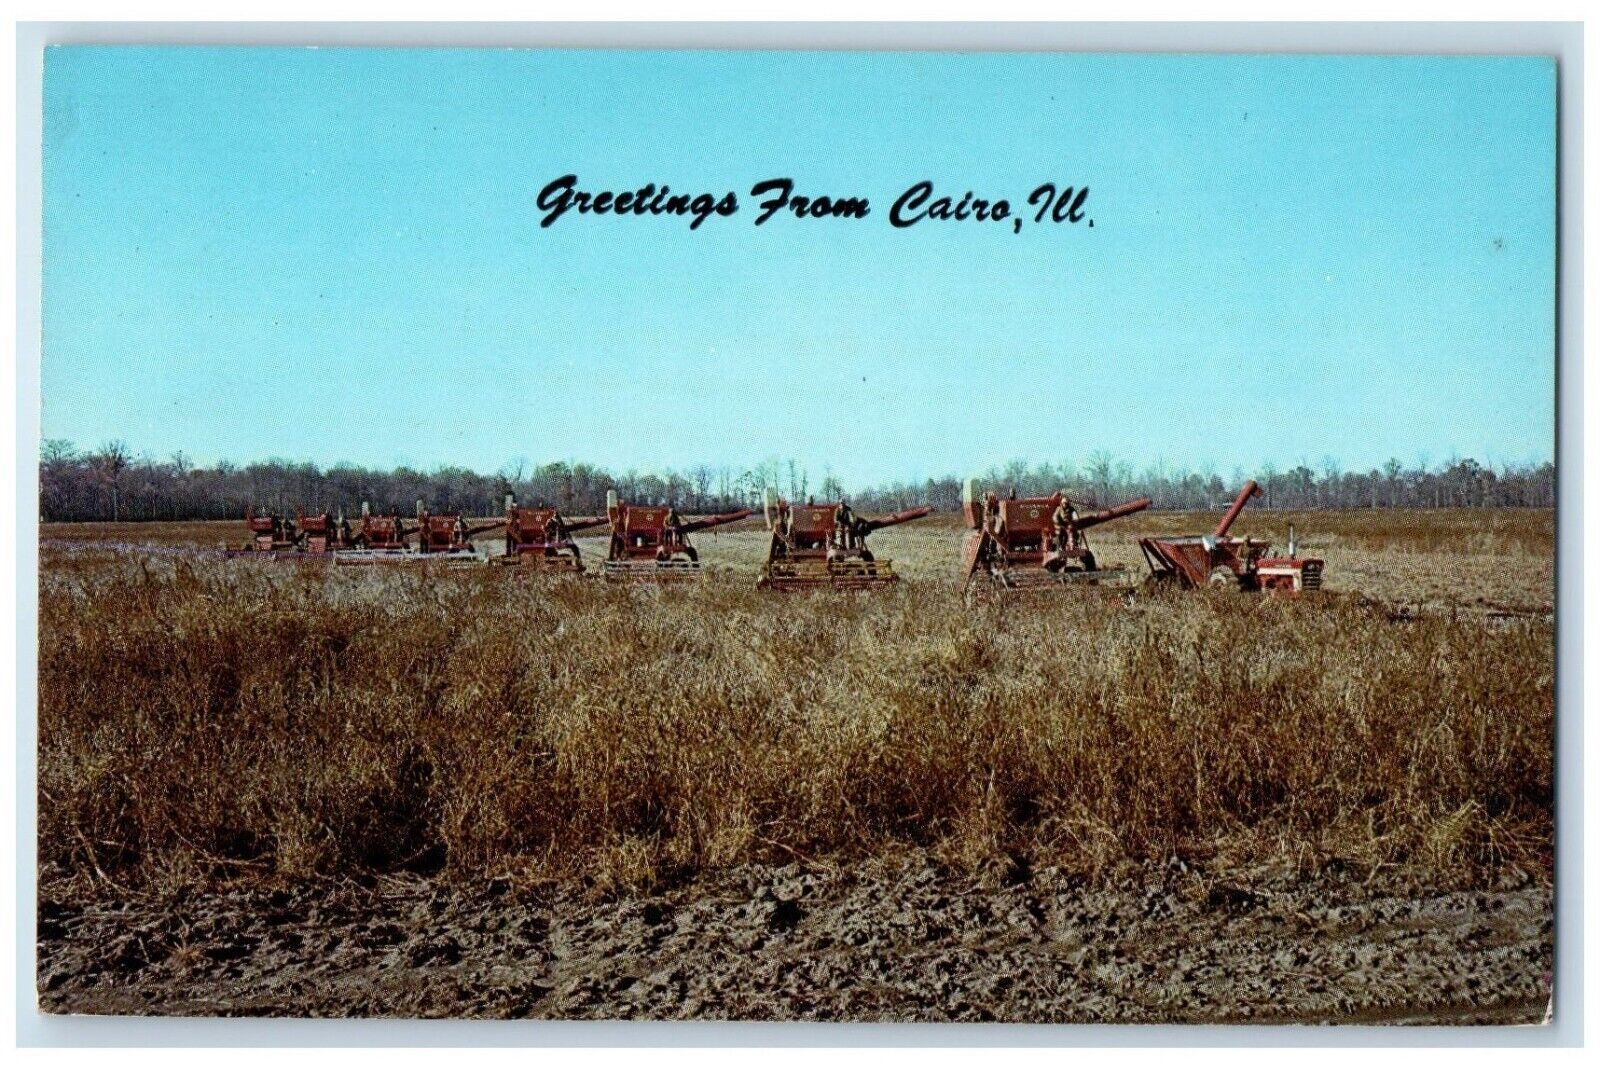 c1960 Greetings From Cairo Soy Bean Harvest Crop Farm Illinois Vintage Postcard